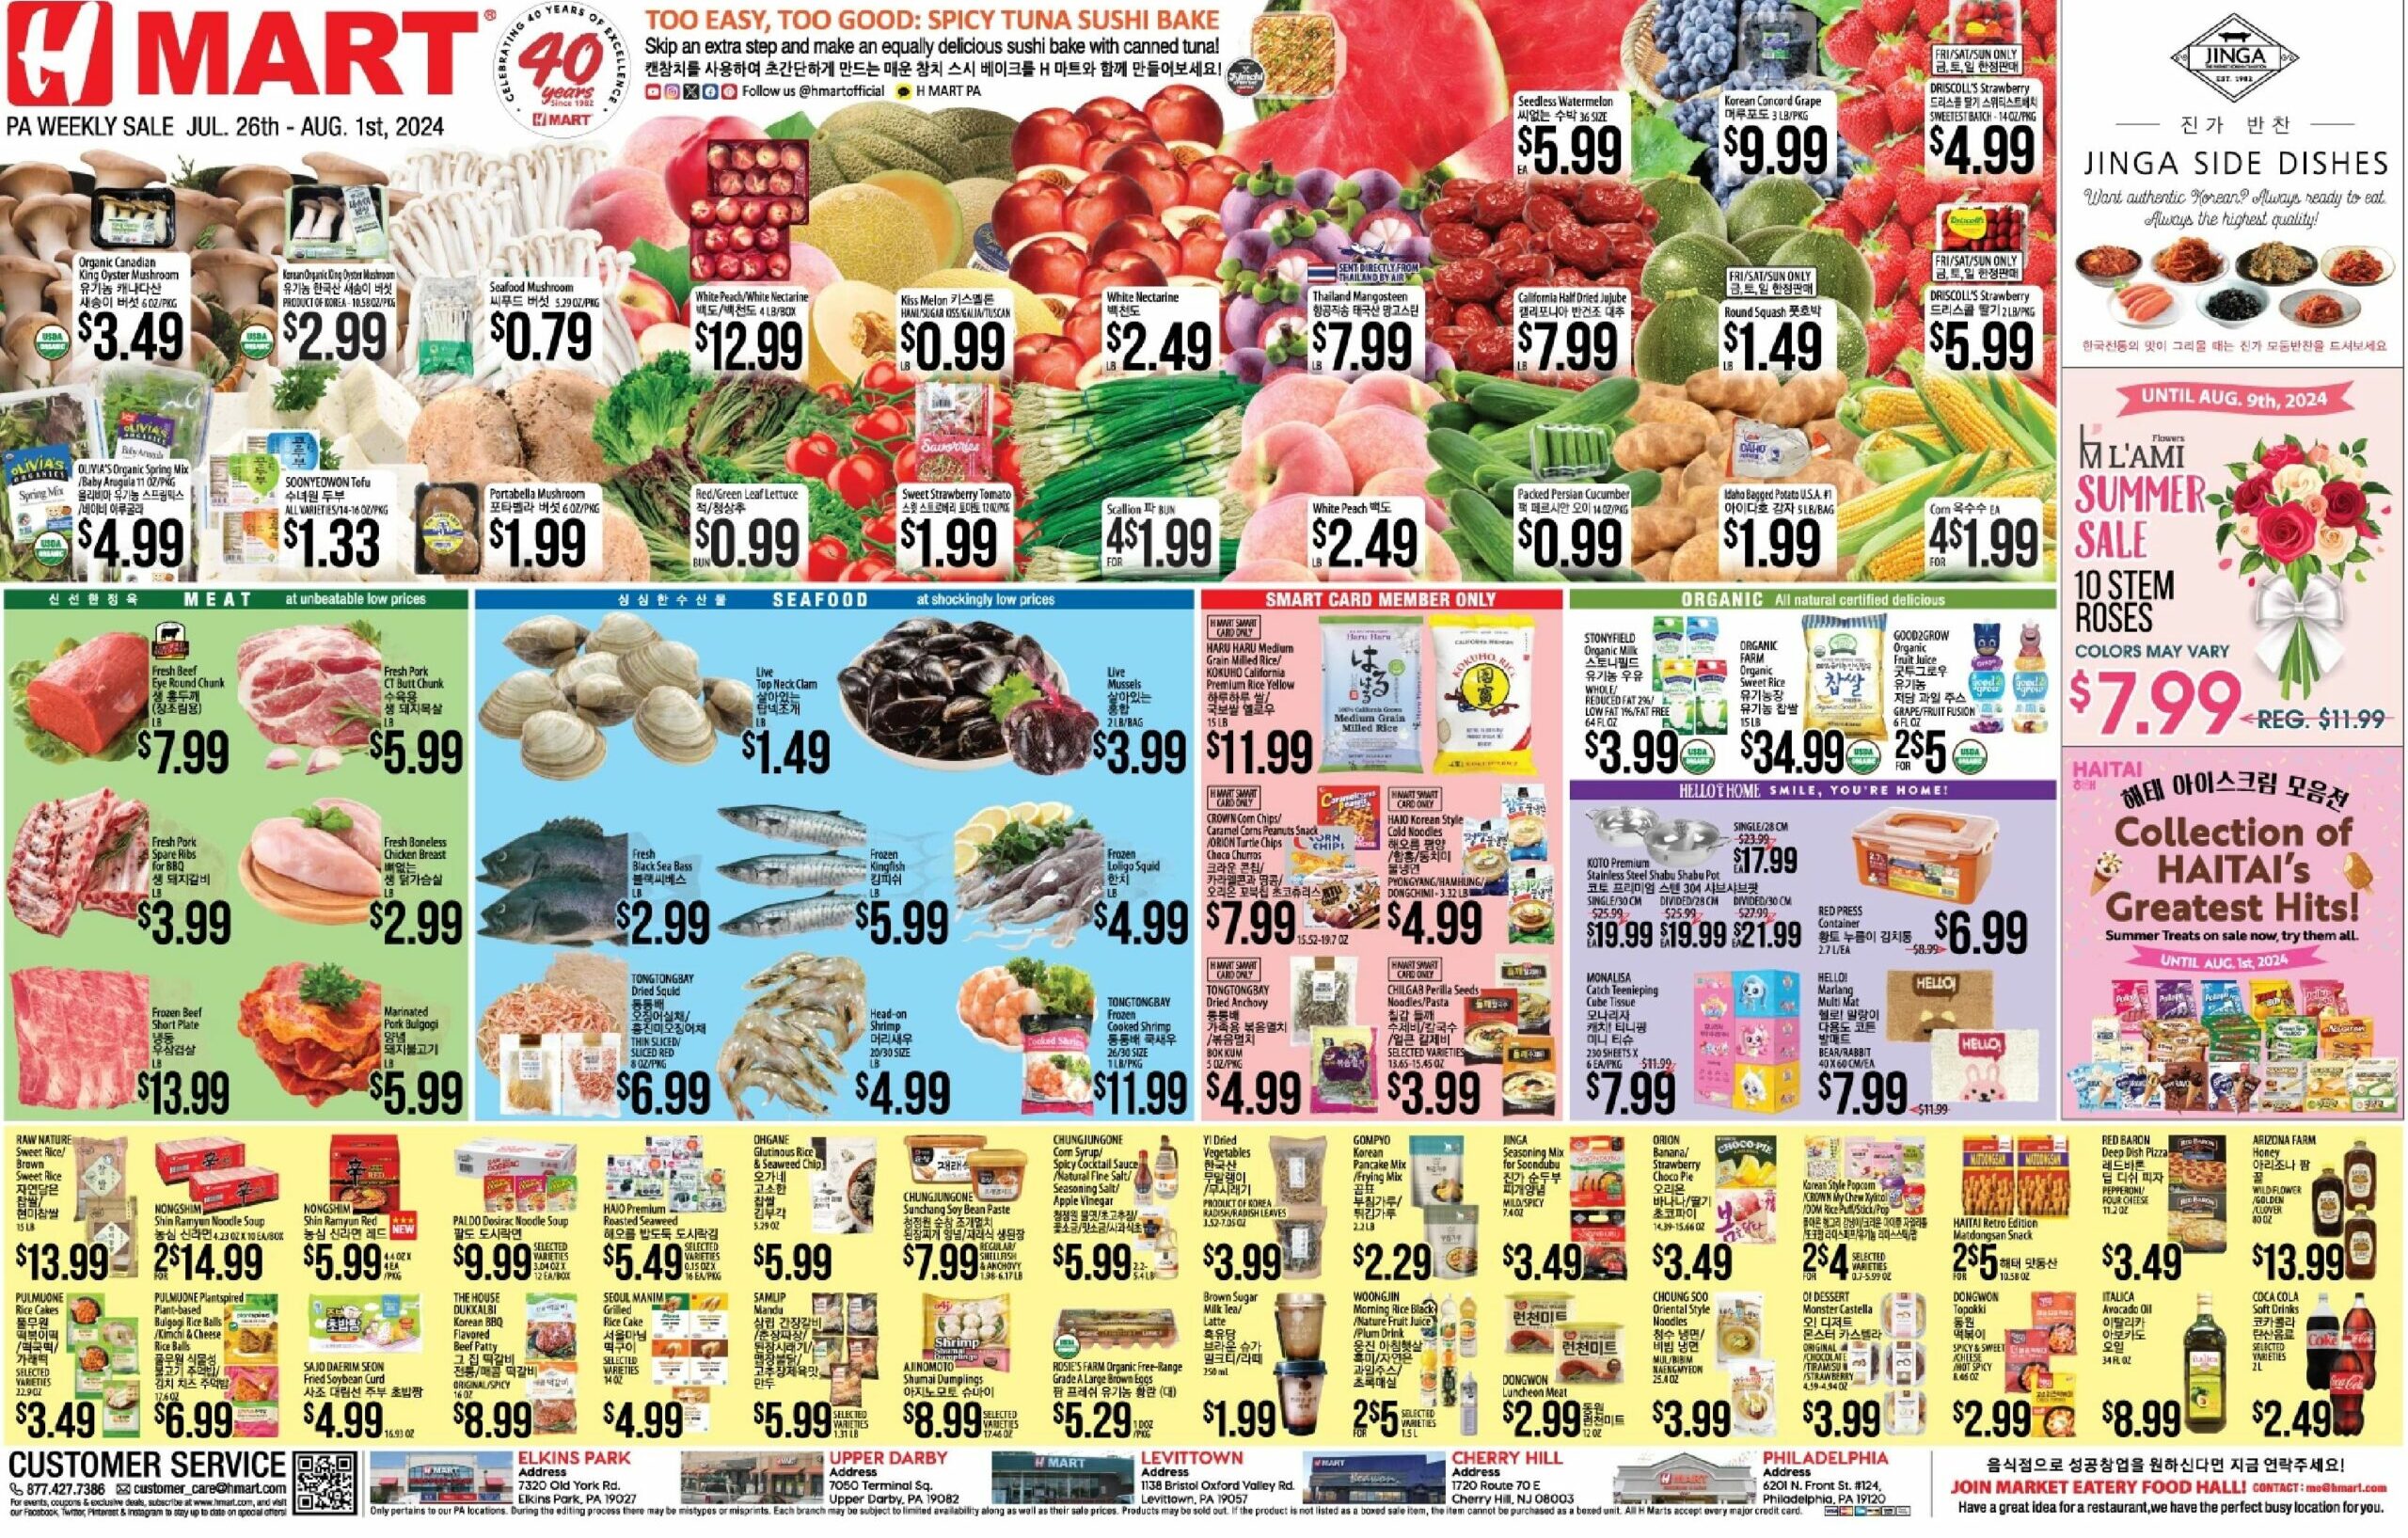 H-Mart_7-26-24-page-001